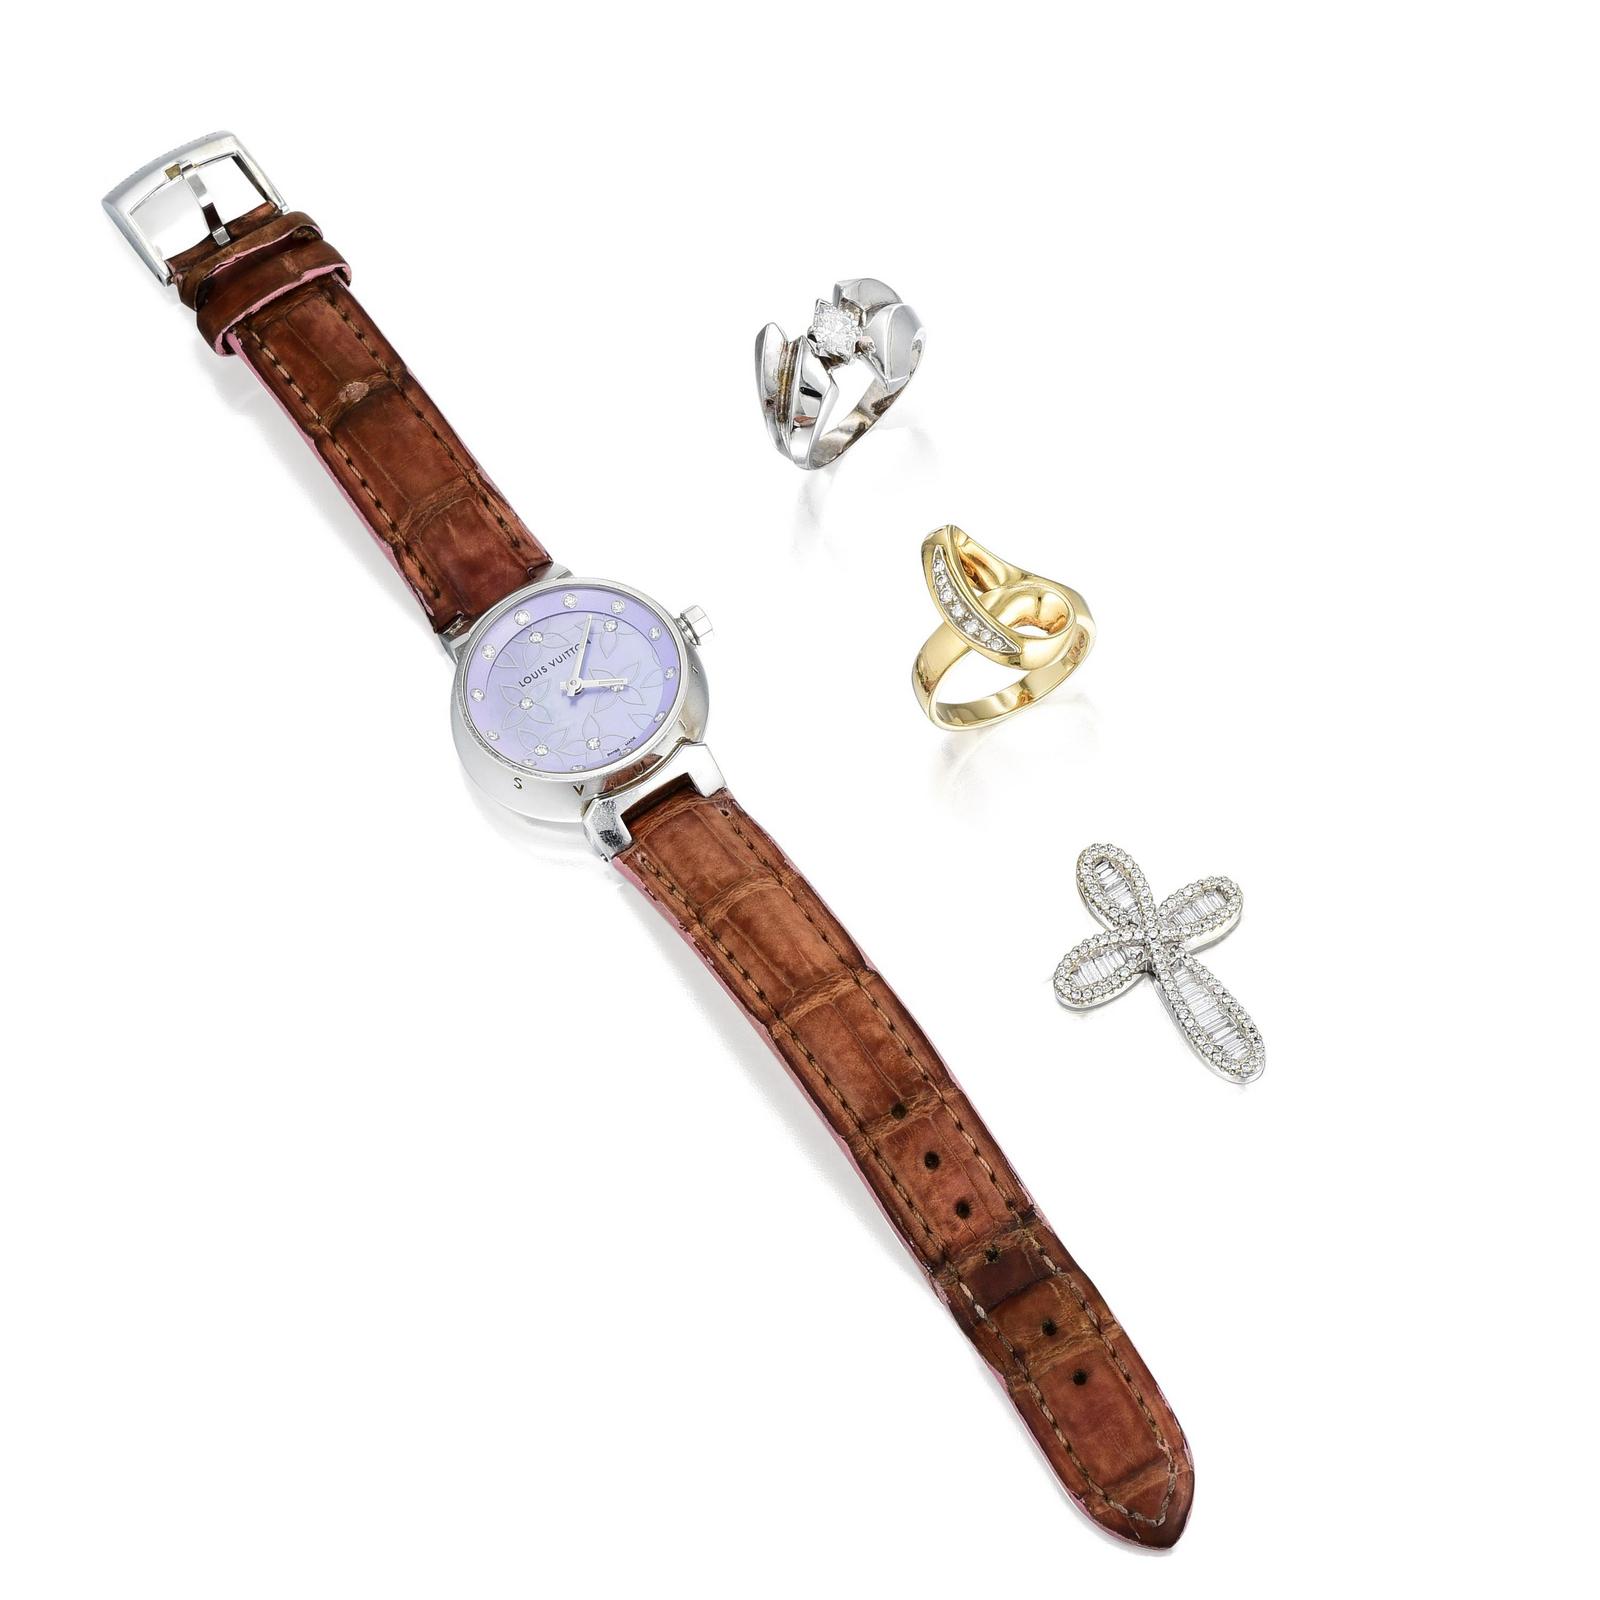 Louis Vuitton Stainless Steel Ladies Watch and a Group of Gold Jewelry